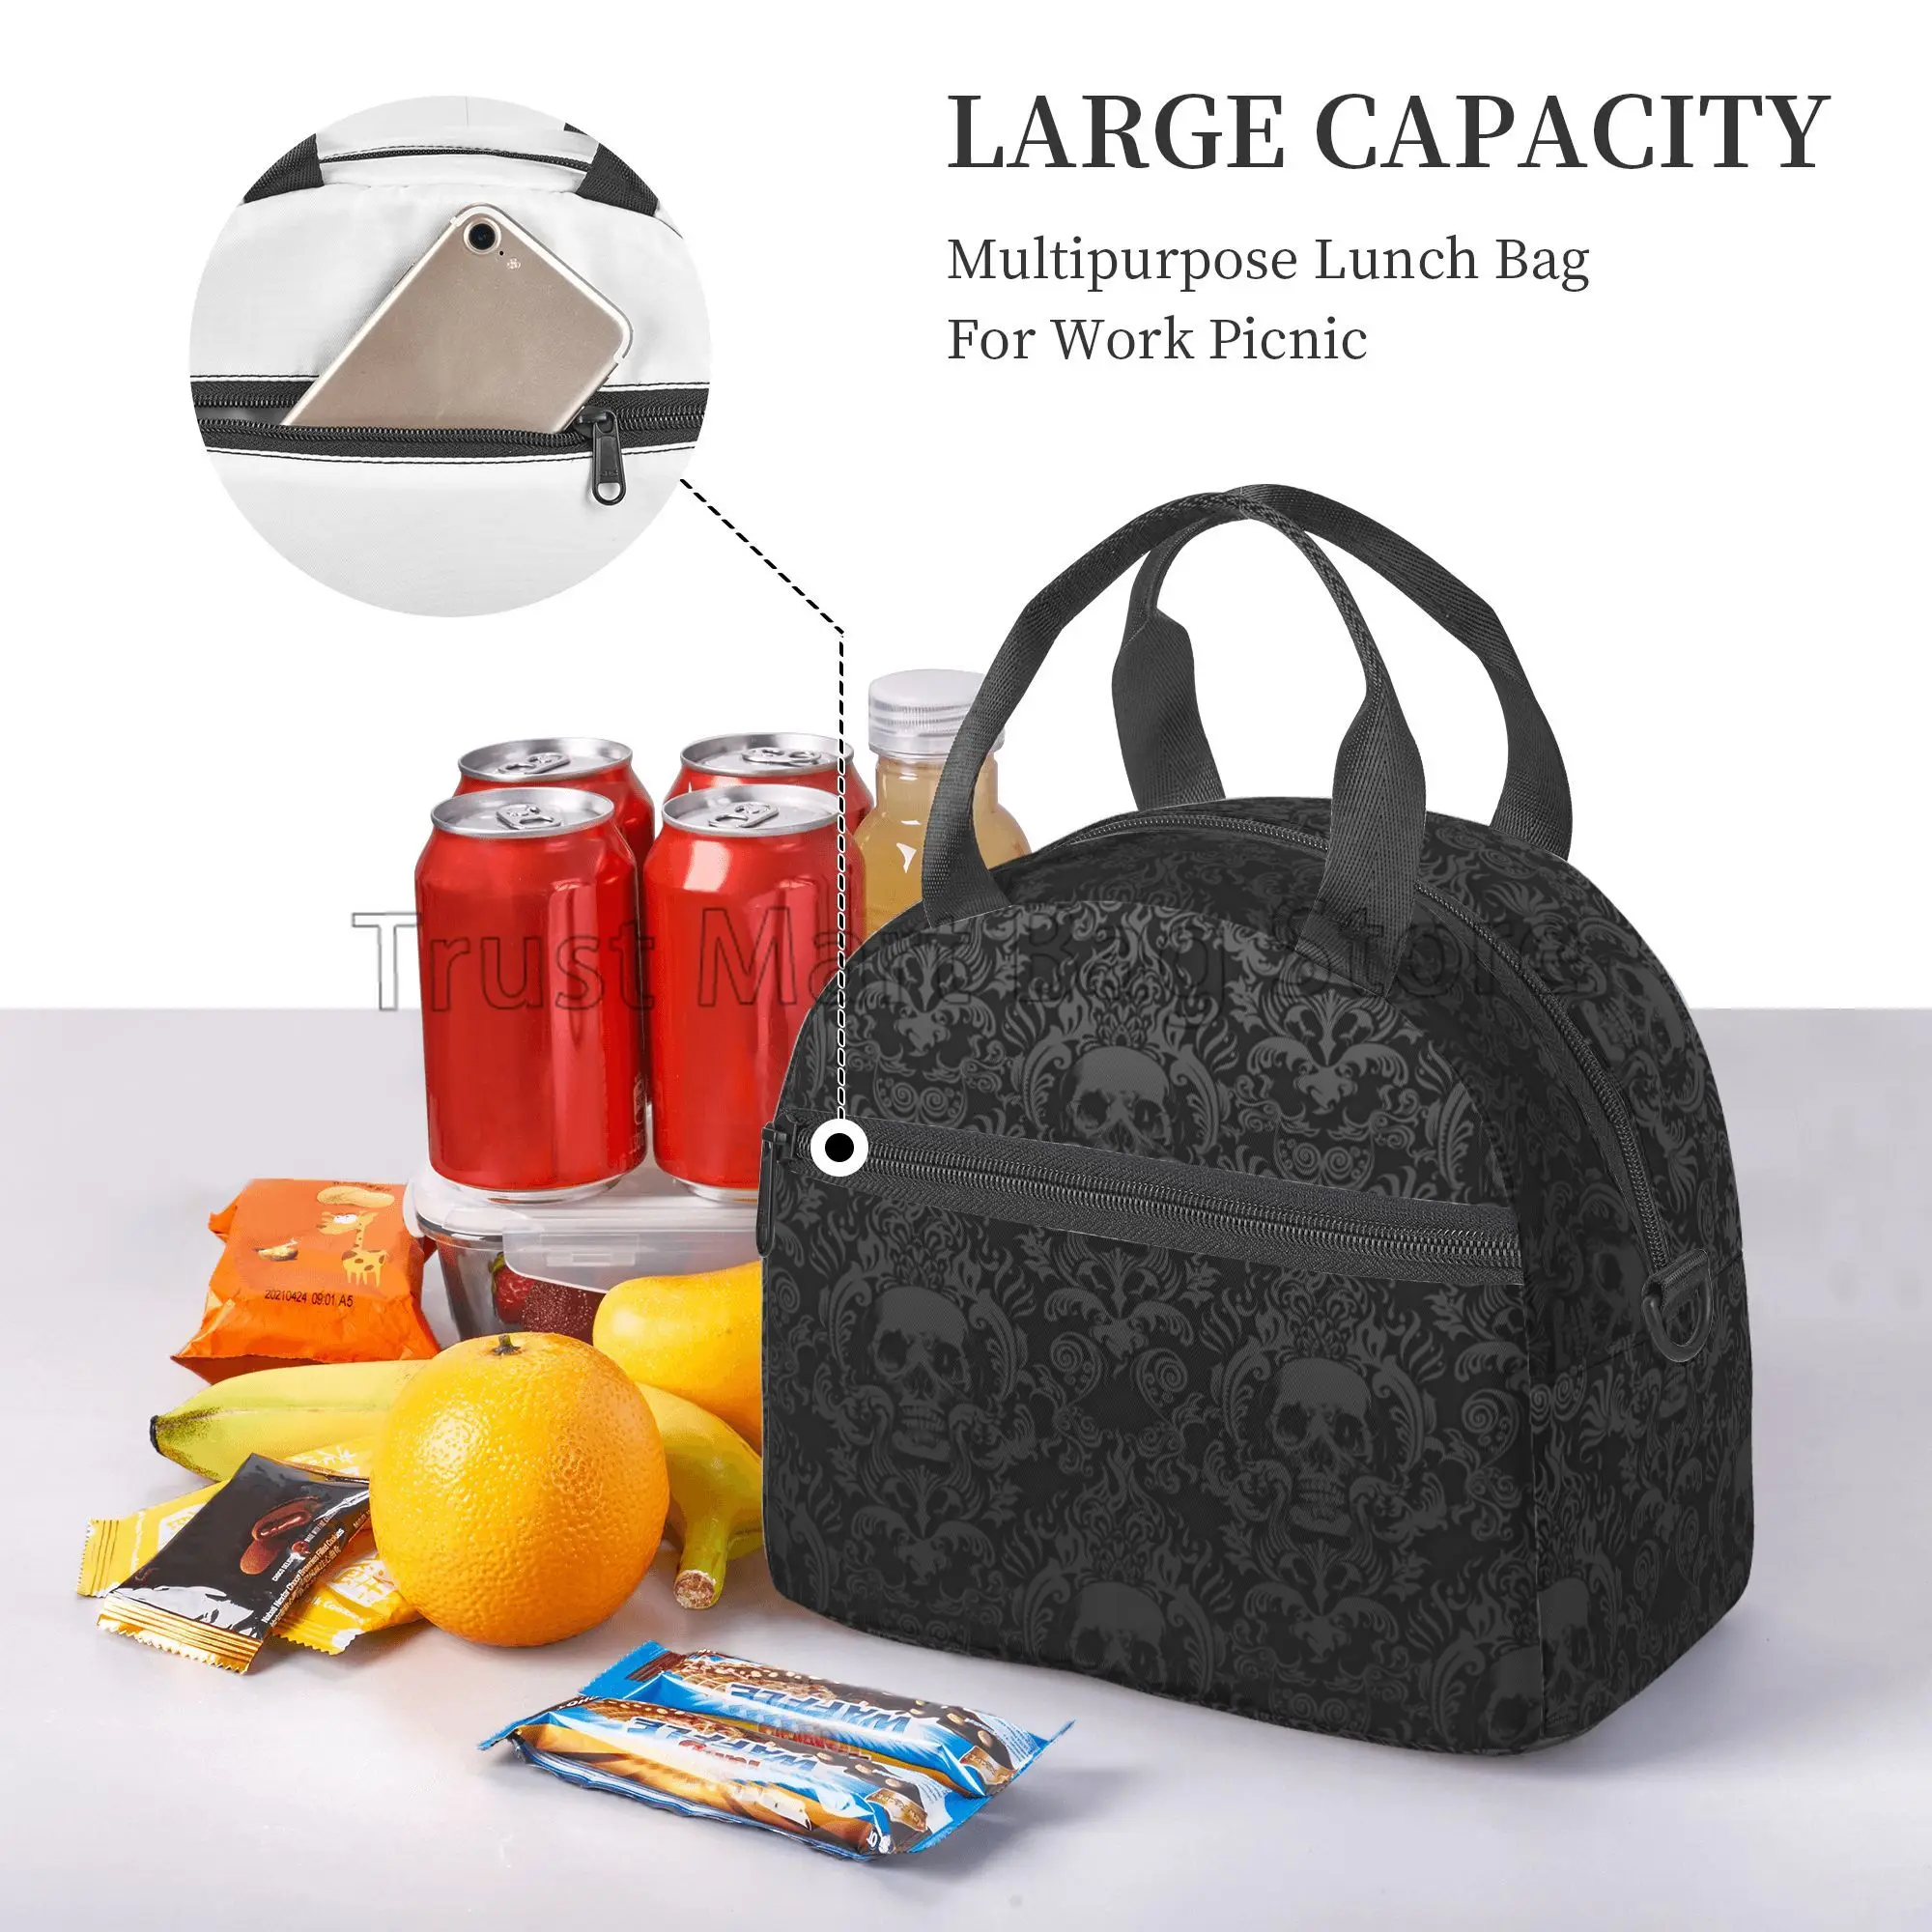 https://ae01.alicdn.com/kf/Sf5dc7827afad44839134e3392ee44c297/Gothic-Black-Skull-Damask-Insulated-Lunch-Bag-Unisex-Lunch-Box-with-Detachable-Shoulder-Strap-Reusable-Thermal.jpg